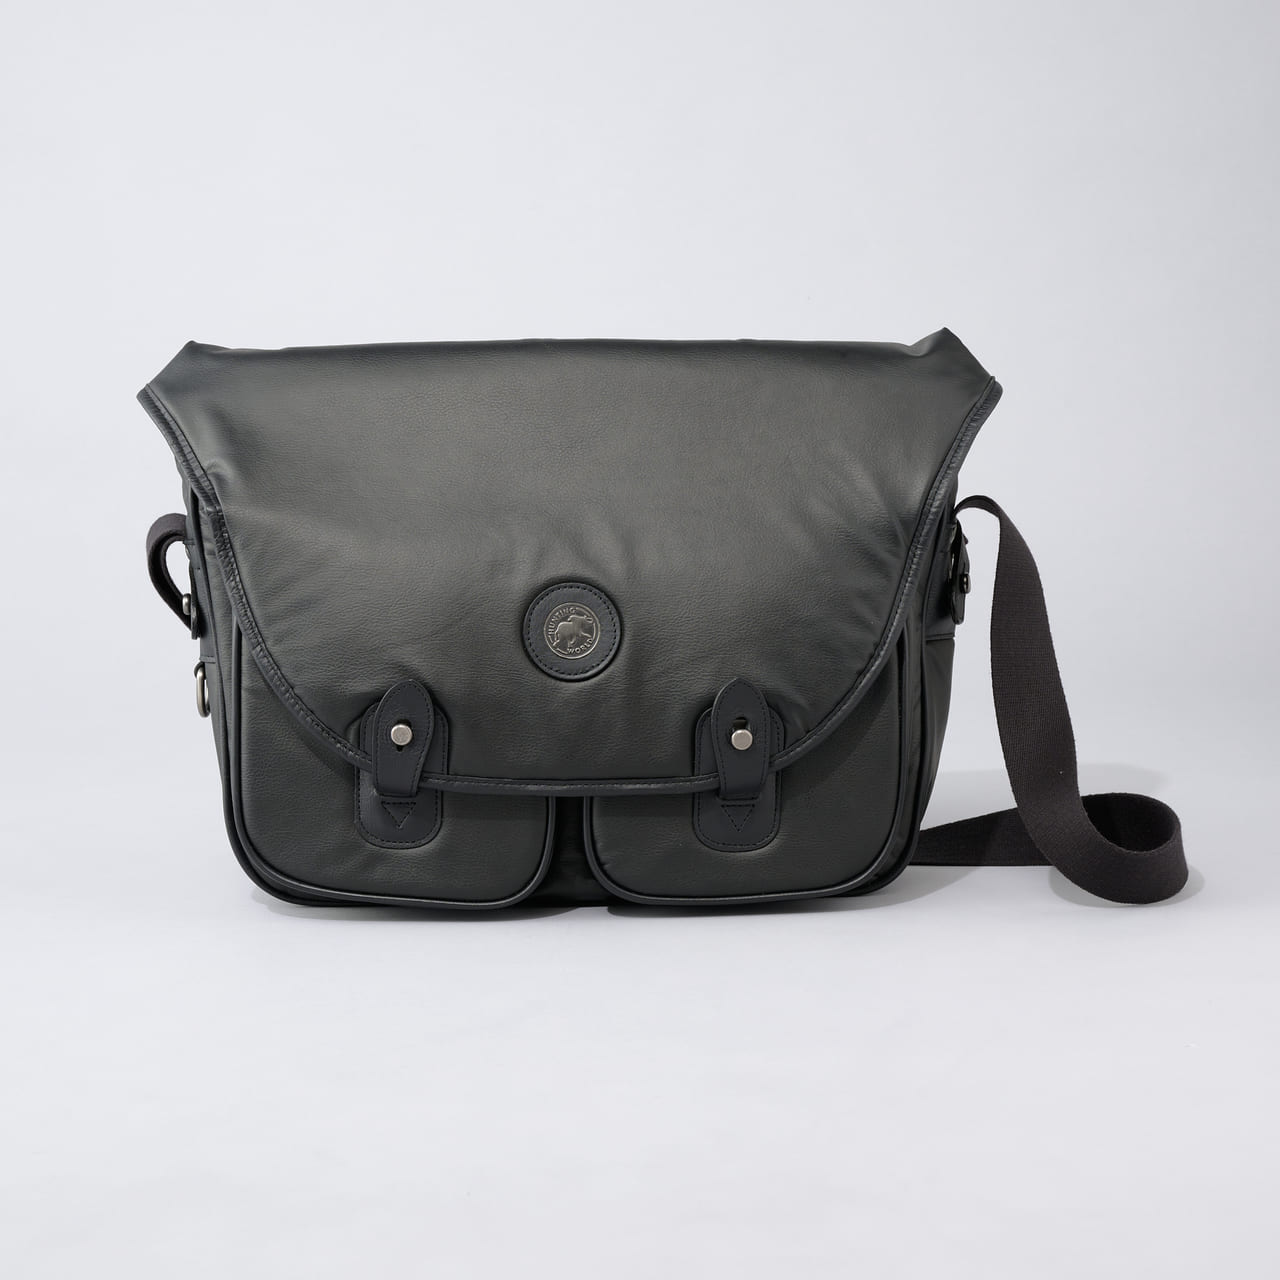 HUNTING WORLD CRAFTED BY DESCENTE.LAB　“CARRYALL MEDIUM”　黒い防水バッグ